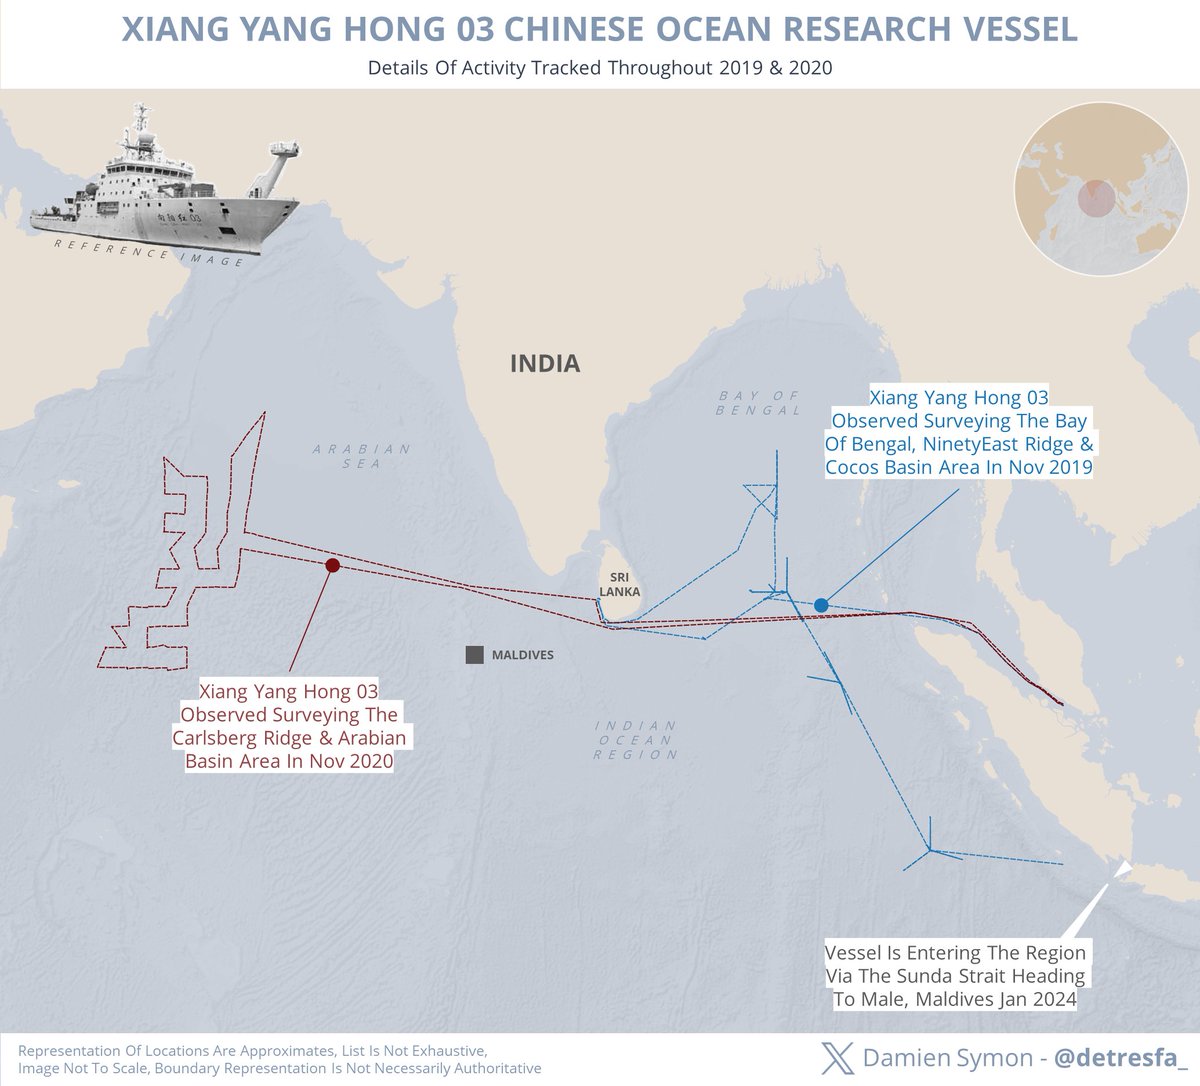 XIANG YANG HONG 03 the Chinese ocean research vessel heading to Male, Maldives is no stranger to the region, having conducted ocean surveys in 2019 & 2020, the vessel has been observed in the IOR, Bay of Bengal & Arabian Sea raising fresh concerns in #India